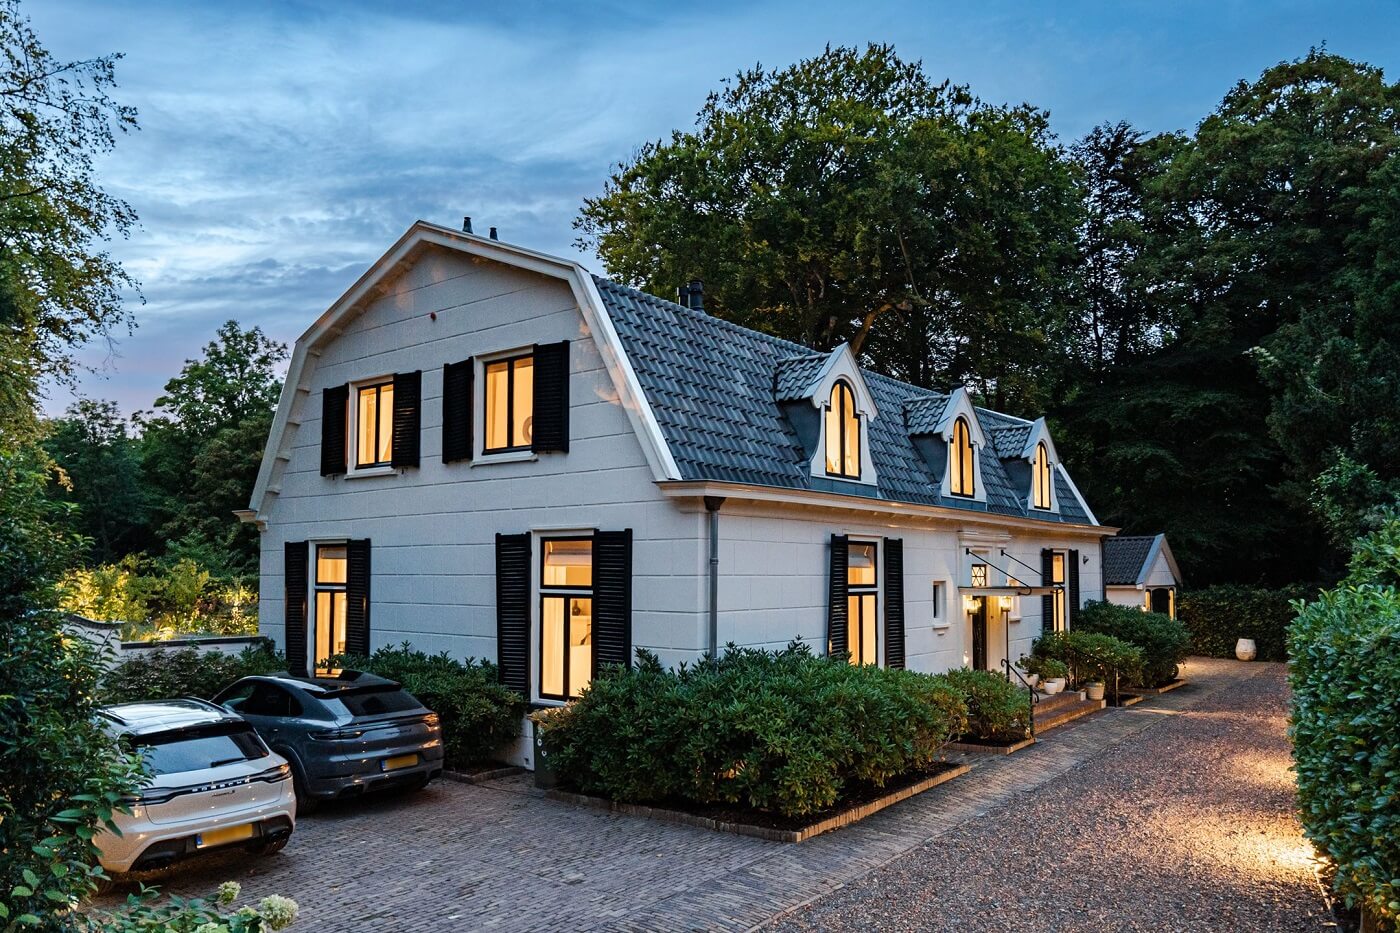 white-villa-former-carriage-house-at-night-nordroom